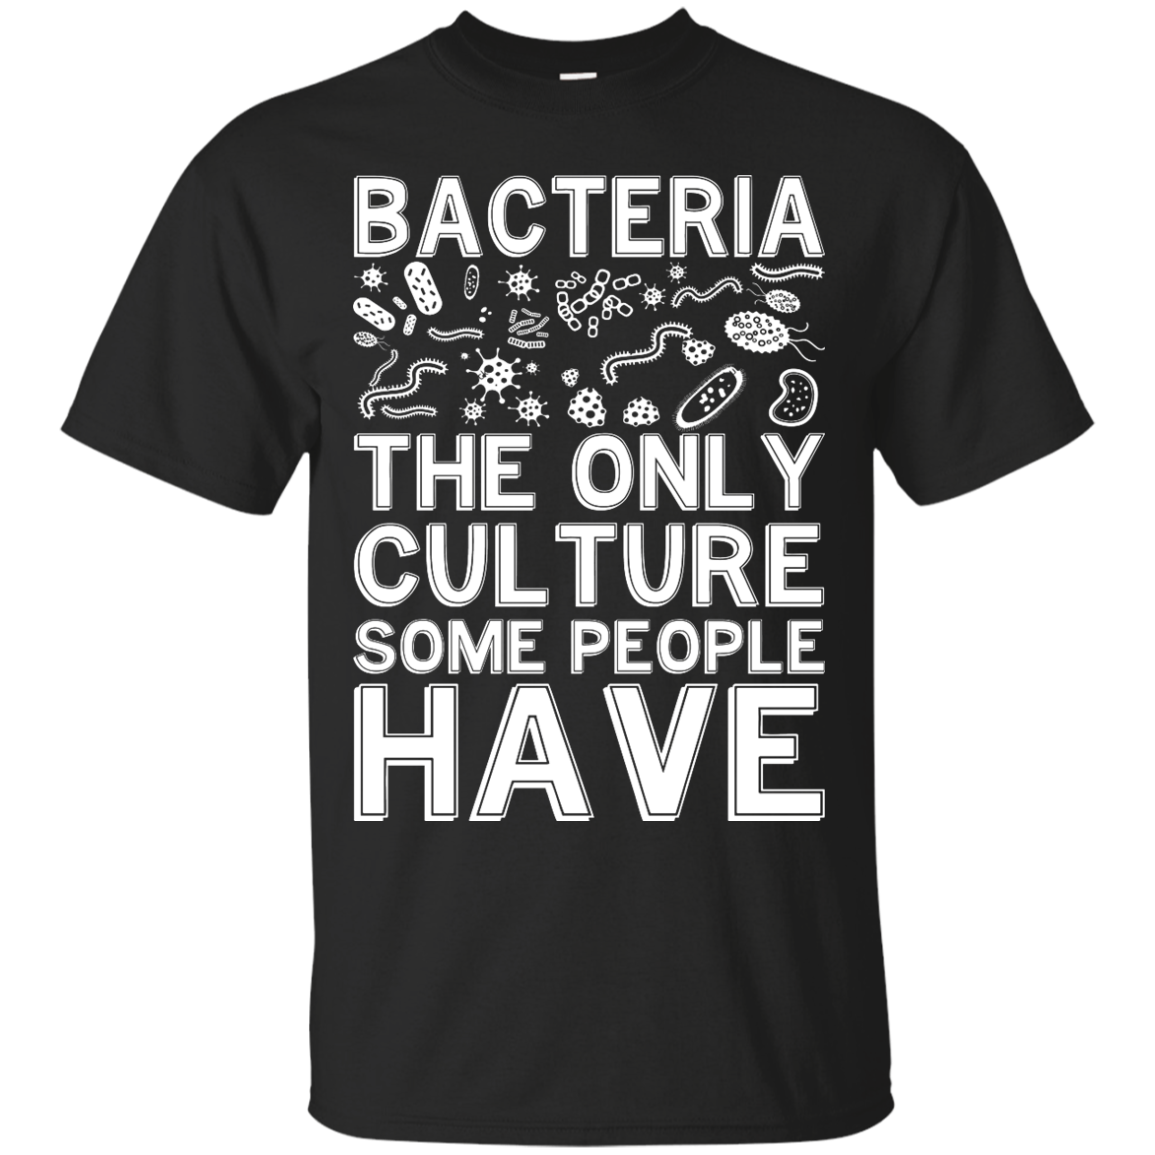 Bacteria the only culture some people have shirt, tank top, hoodie